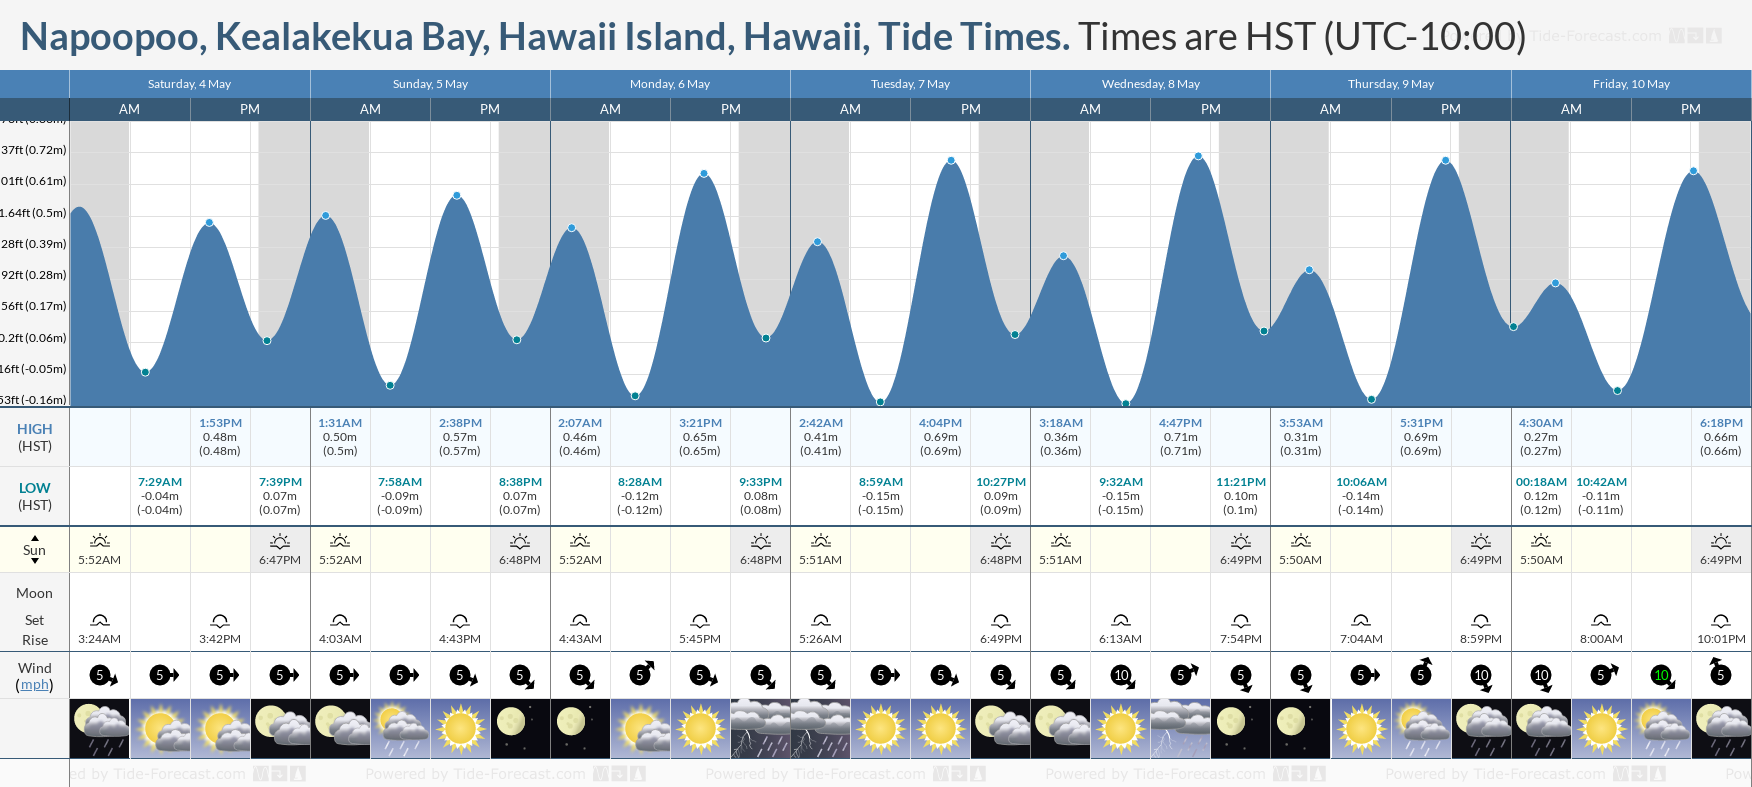 Napoopoo, Kealakekua Bay, Hawaii Island, Hawaii Tide Chart including high and low tide tide times for the next 7 days